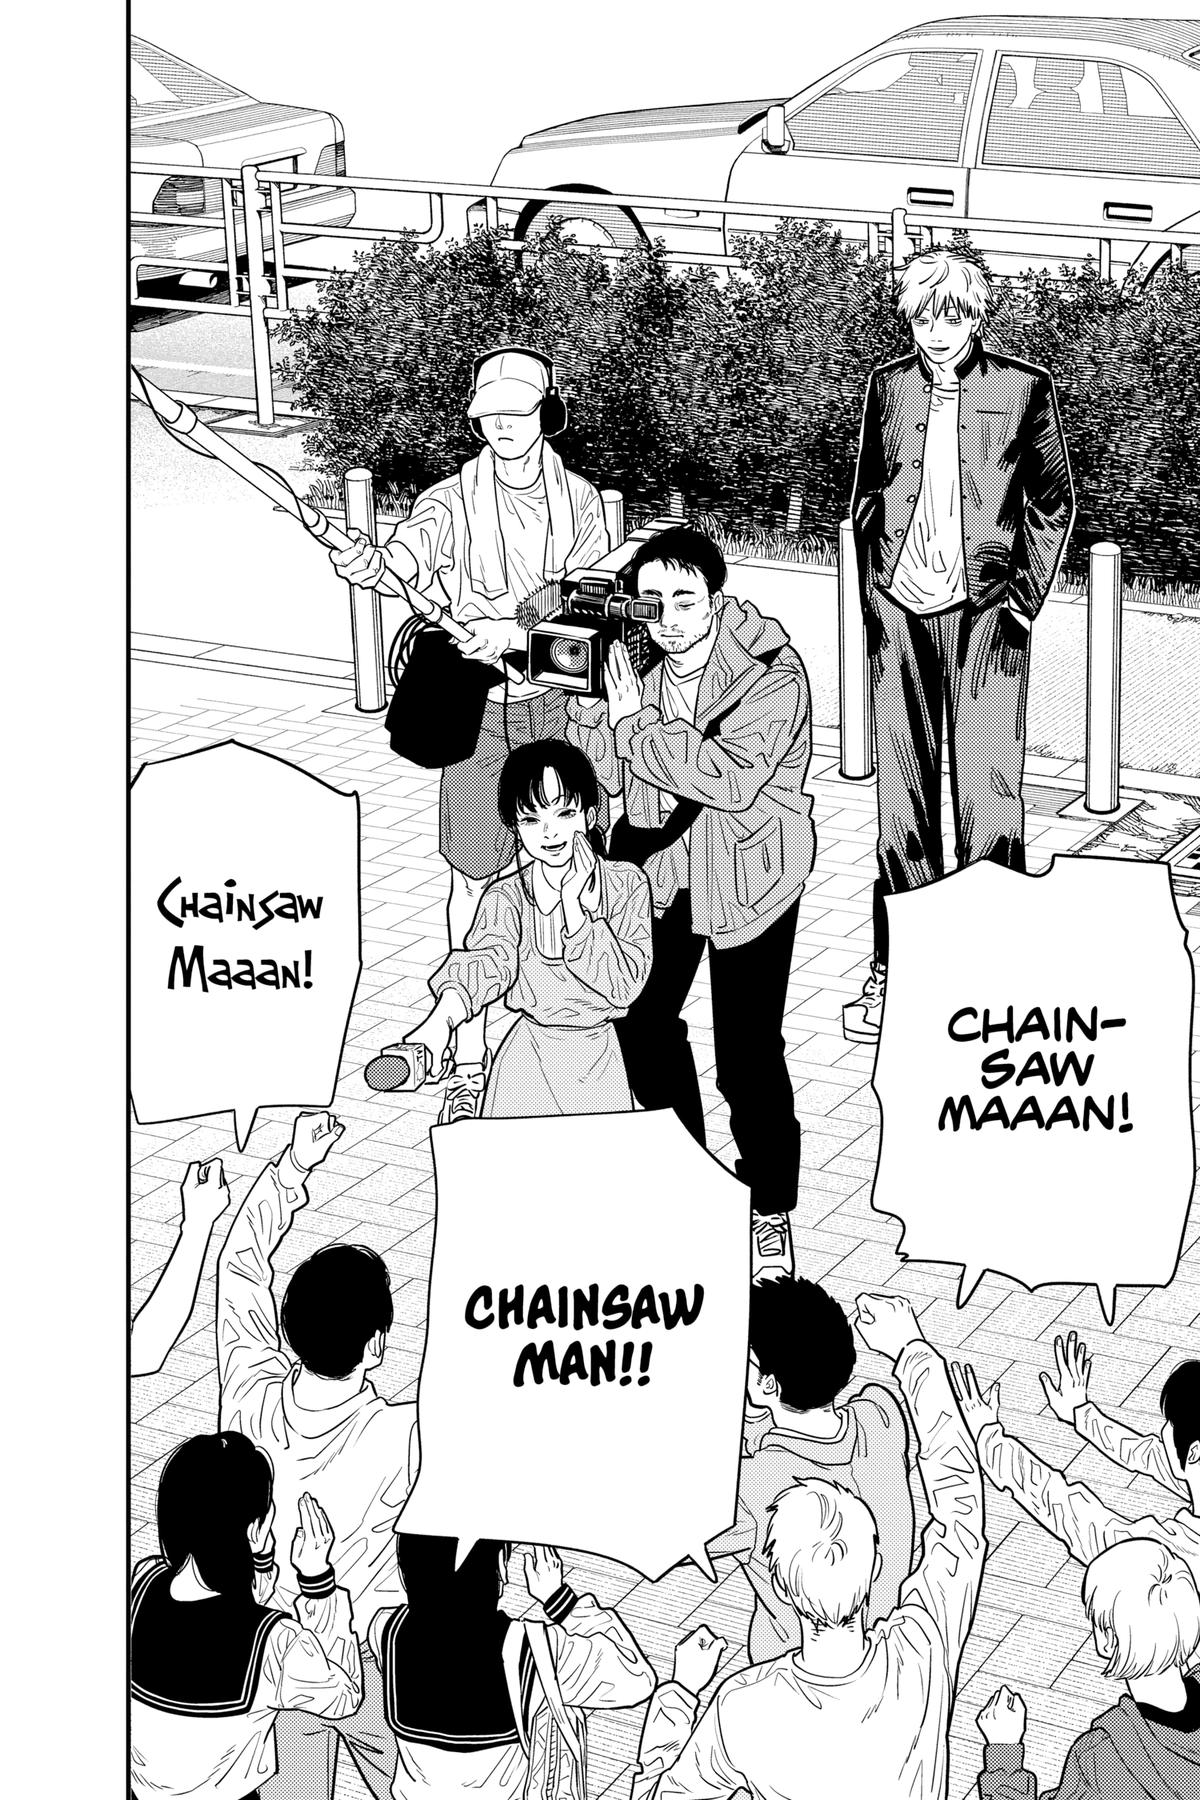 Chainsaw Man Part 2 chapter 103 is now available; how to read for free in  English - Meristation